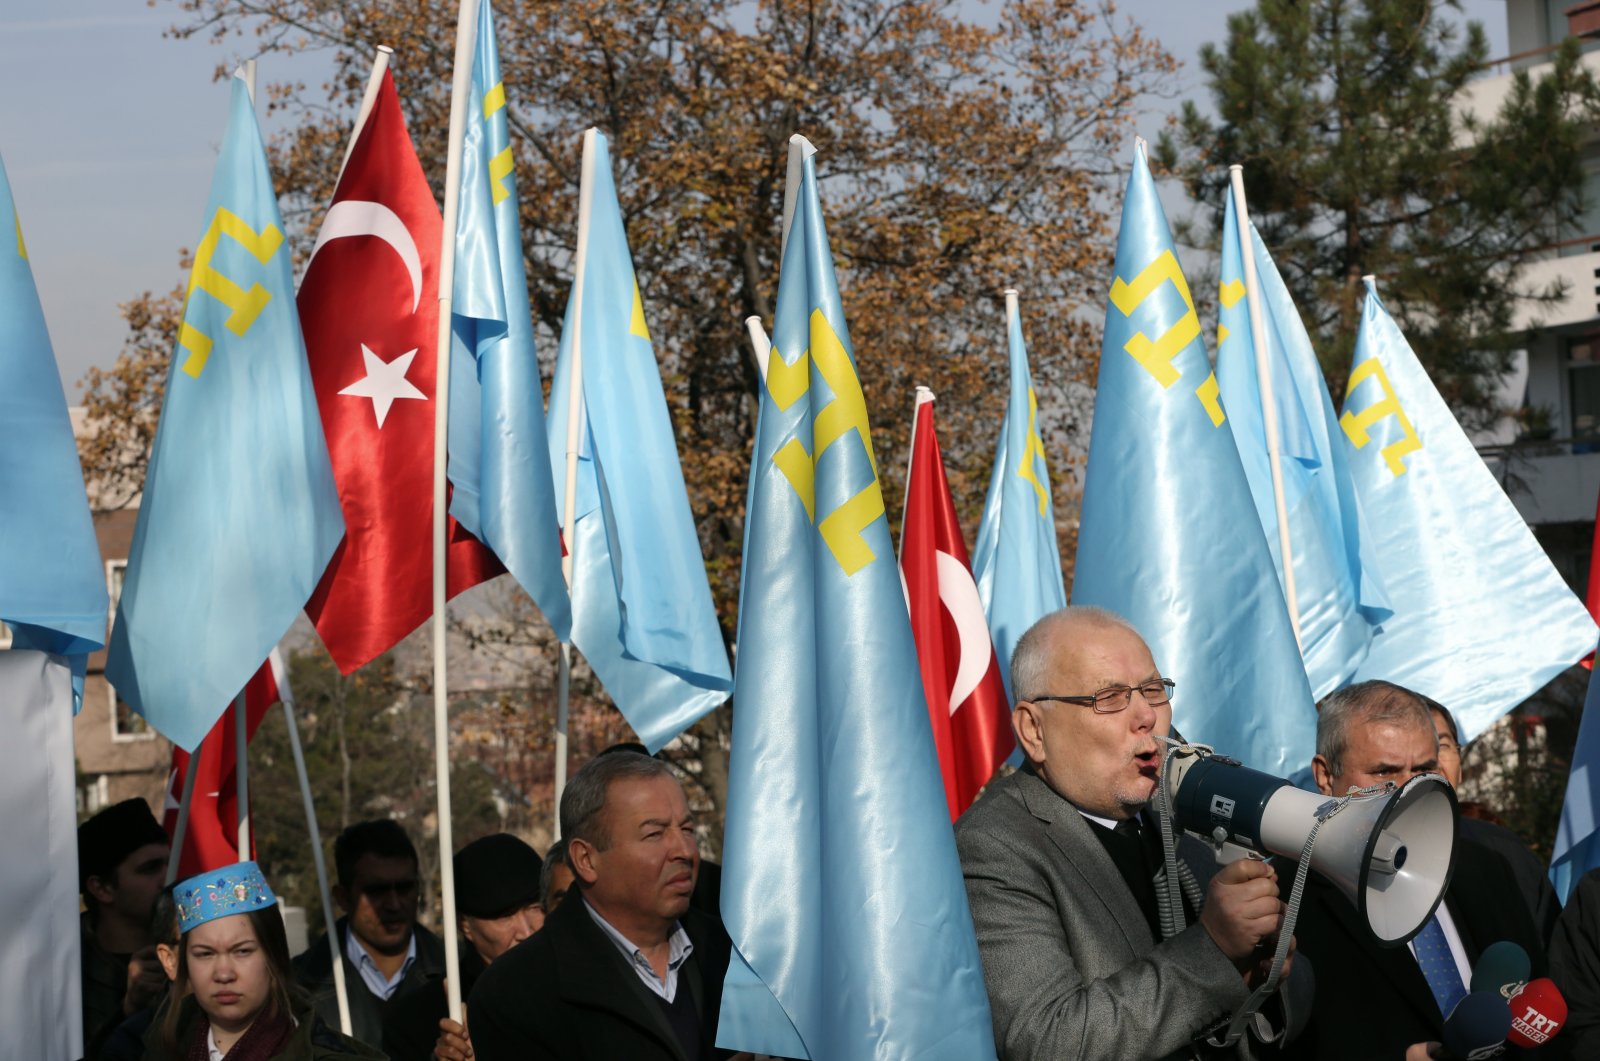 Crimean Tatars living in Turkey stage a protest outside the Russian embassy in Ankara, Turkey, Dec. 10, 2015. (AP Photo)